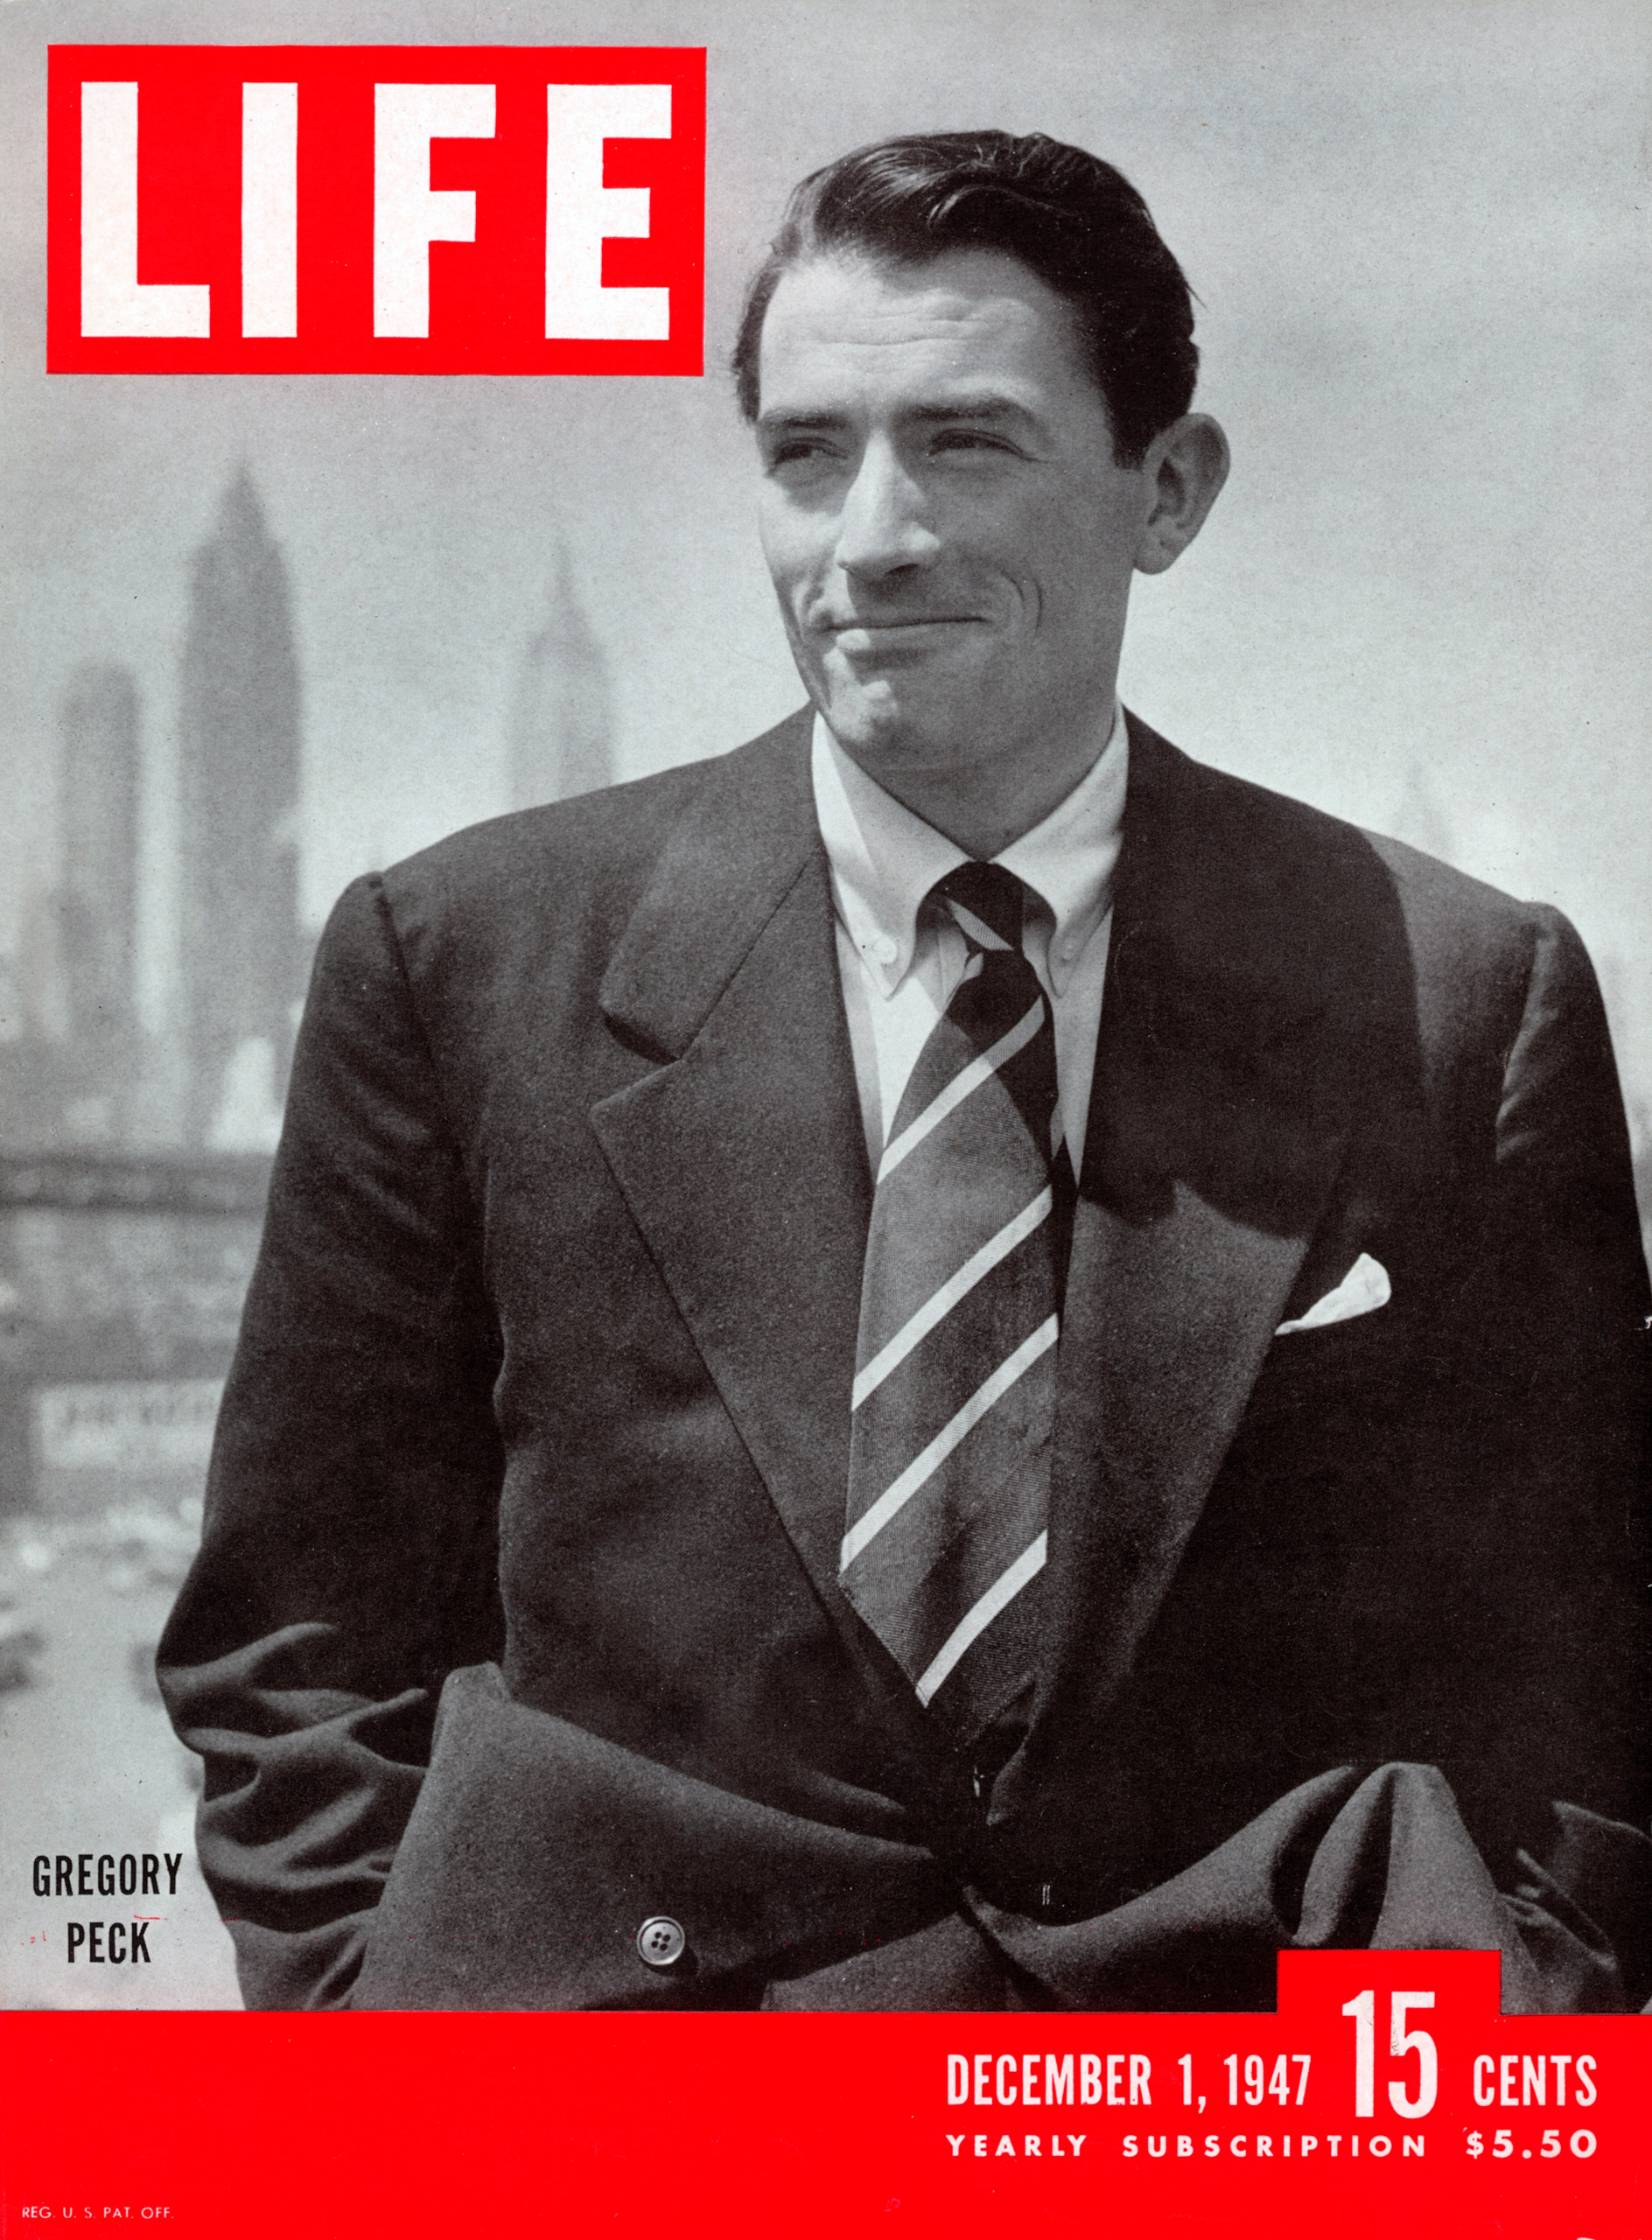 December 1, 1947 cover of LIFE magazine with Gregory Peck.